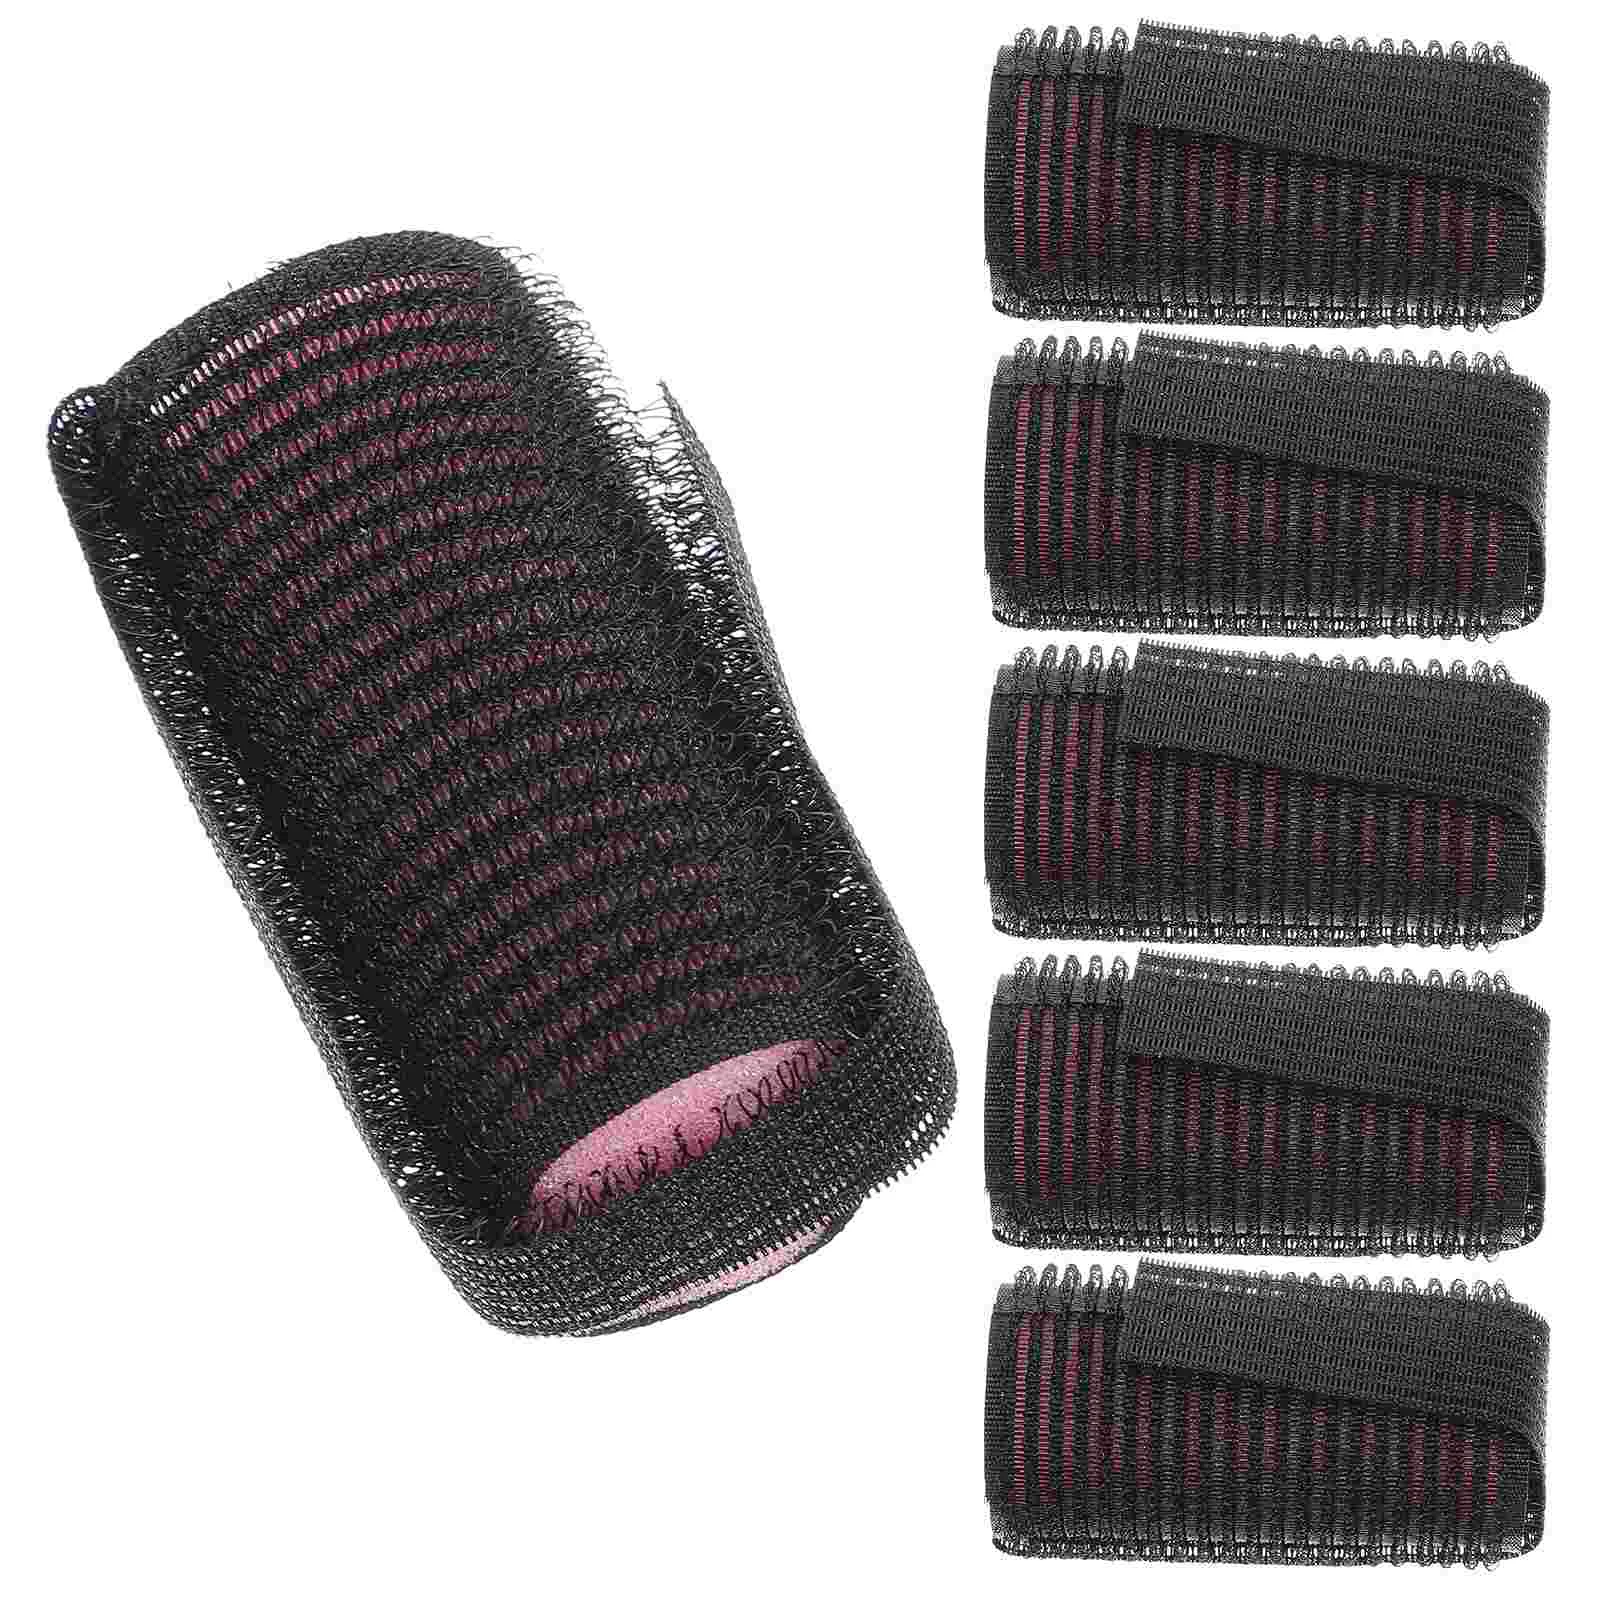 

6 Pcs Salon Hair Roller Self-adhesive Curler Hairdressing Curlers Bangs Styling Grip Wrap Foam Rollers Diy Curly Hairstyle